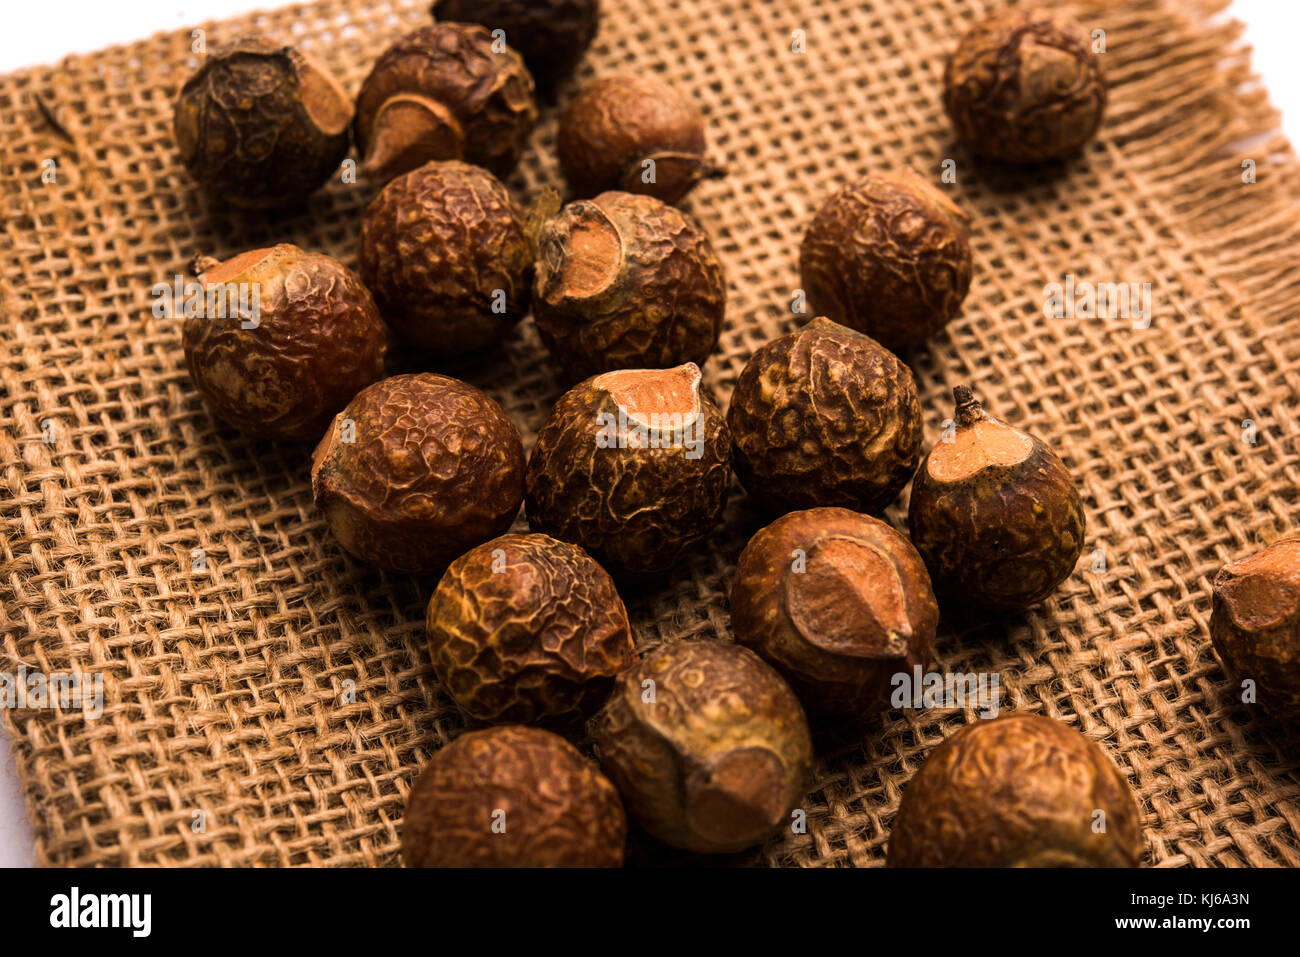 Raw Aritha or Reetha fruit also known as Soap-nuts which is the main ingredient in any soaps and shampoos. Also known as Sapindus emarginatus. selecti Stock Photo